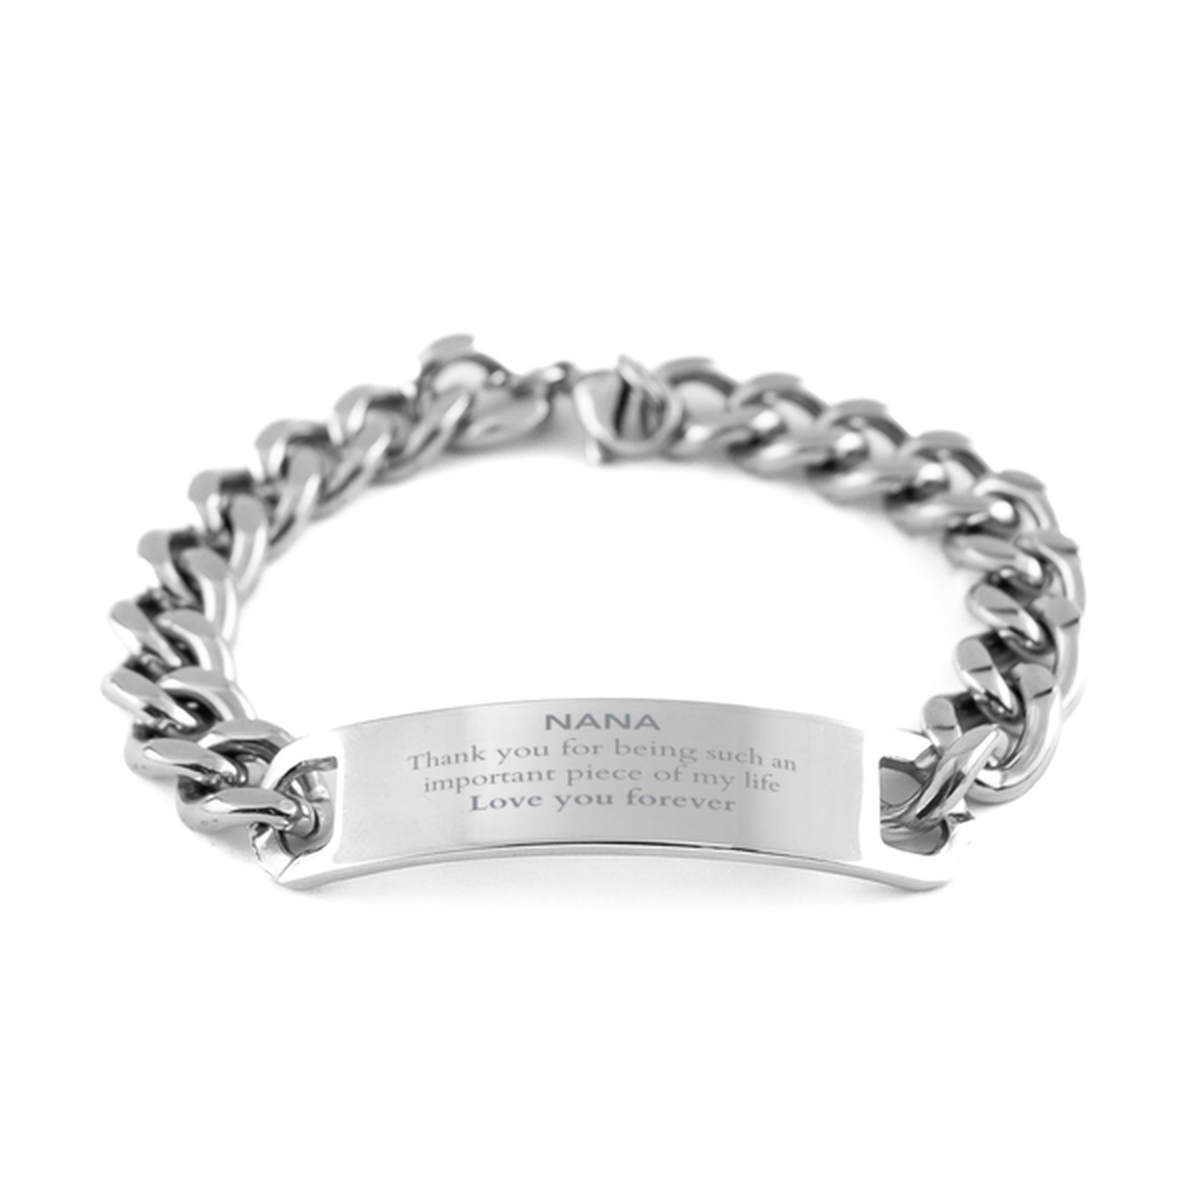 Appropriate Nana Cuban Chain Stainless Steel Bracelet Epic Birthday Gifts for Nana Thank you for being such an important piece of my life Nana Christmas Mothers Fathers Day